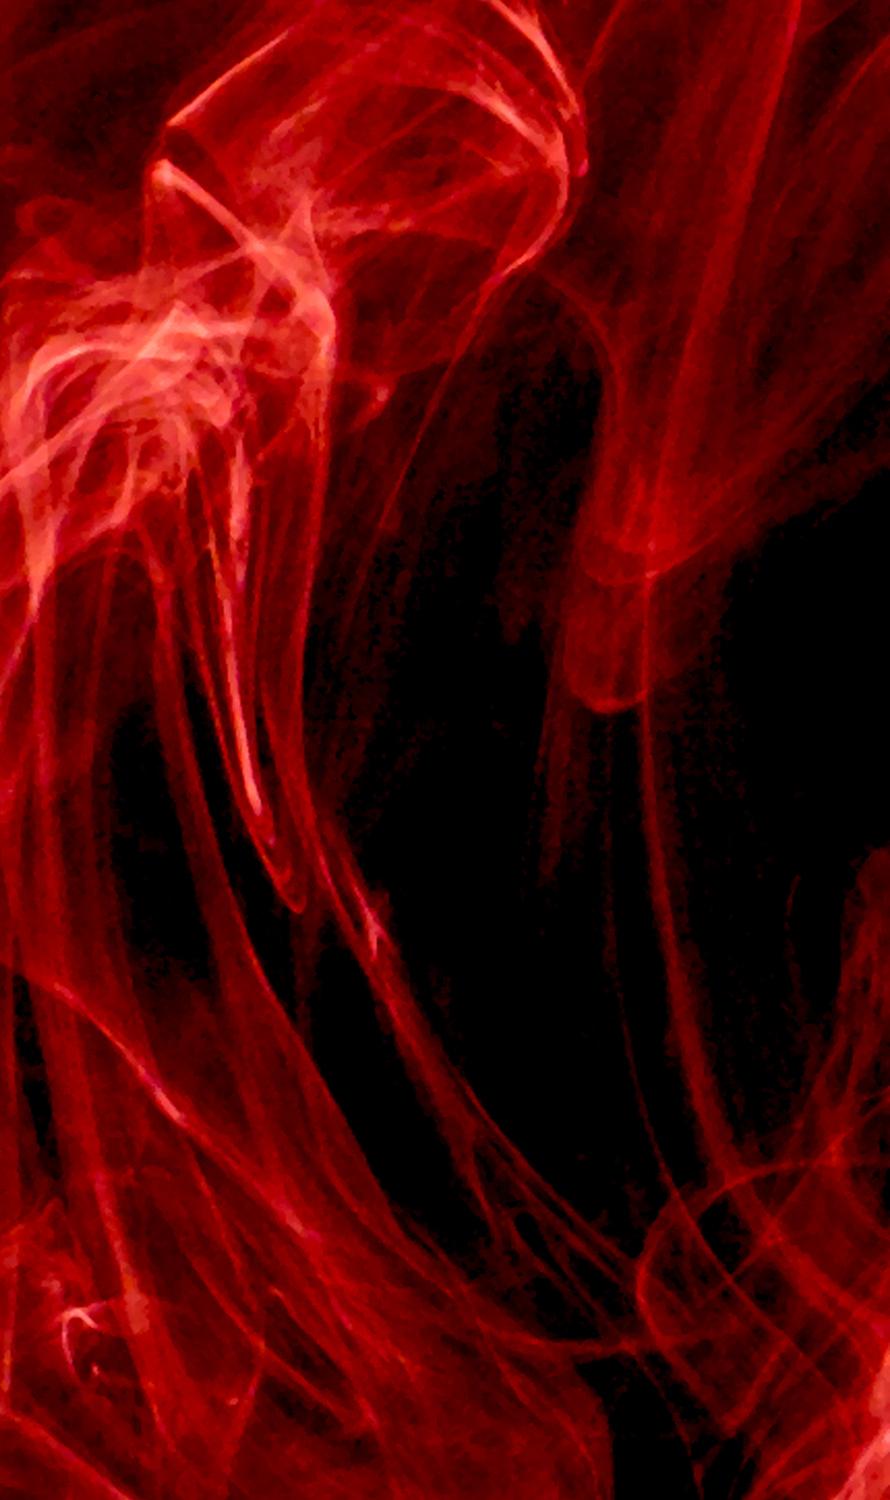 Burning Heart - Mystic Series II - Abstract Photograph by Robert Khoi